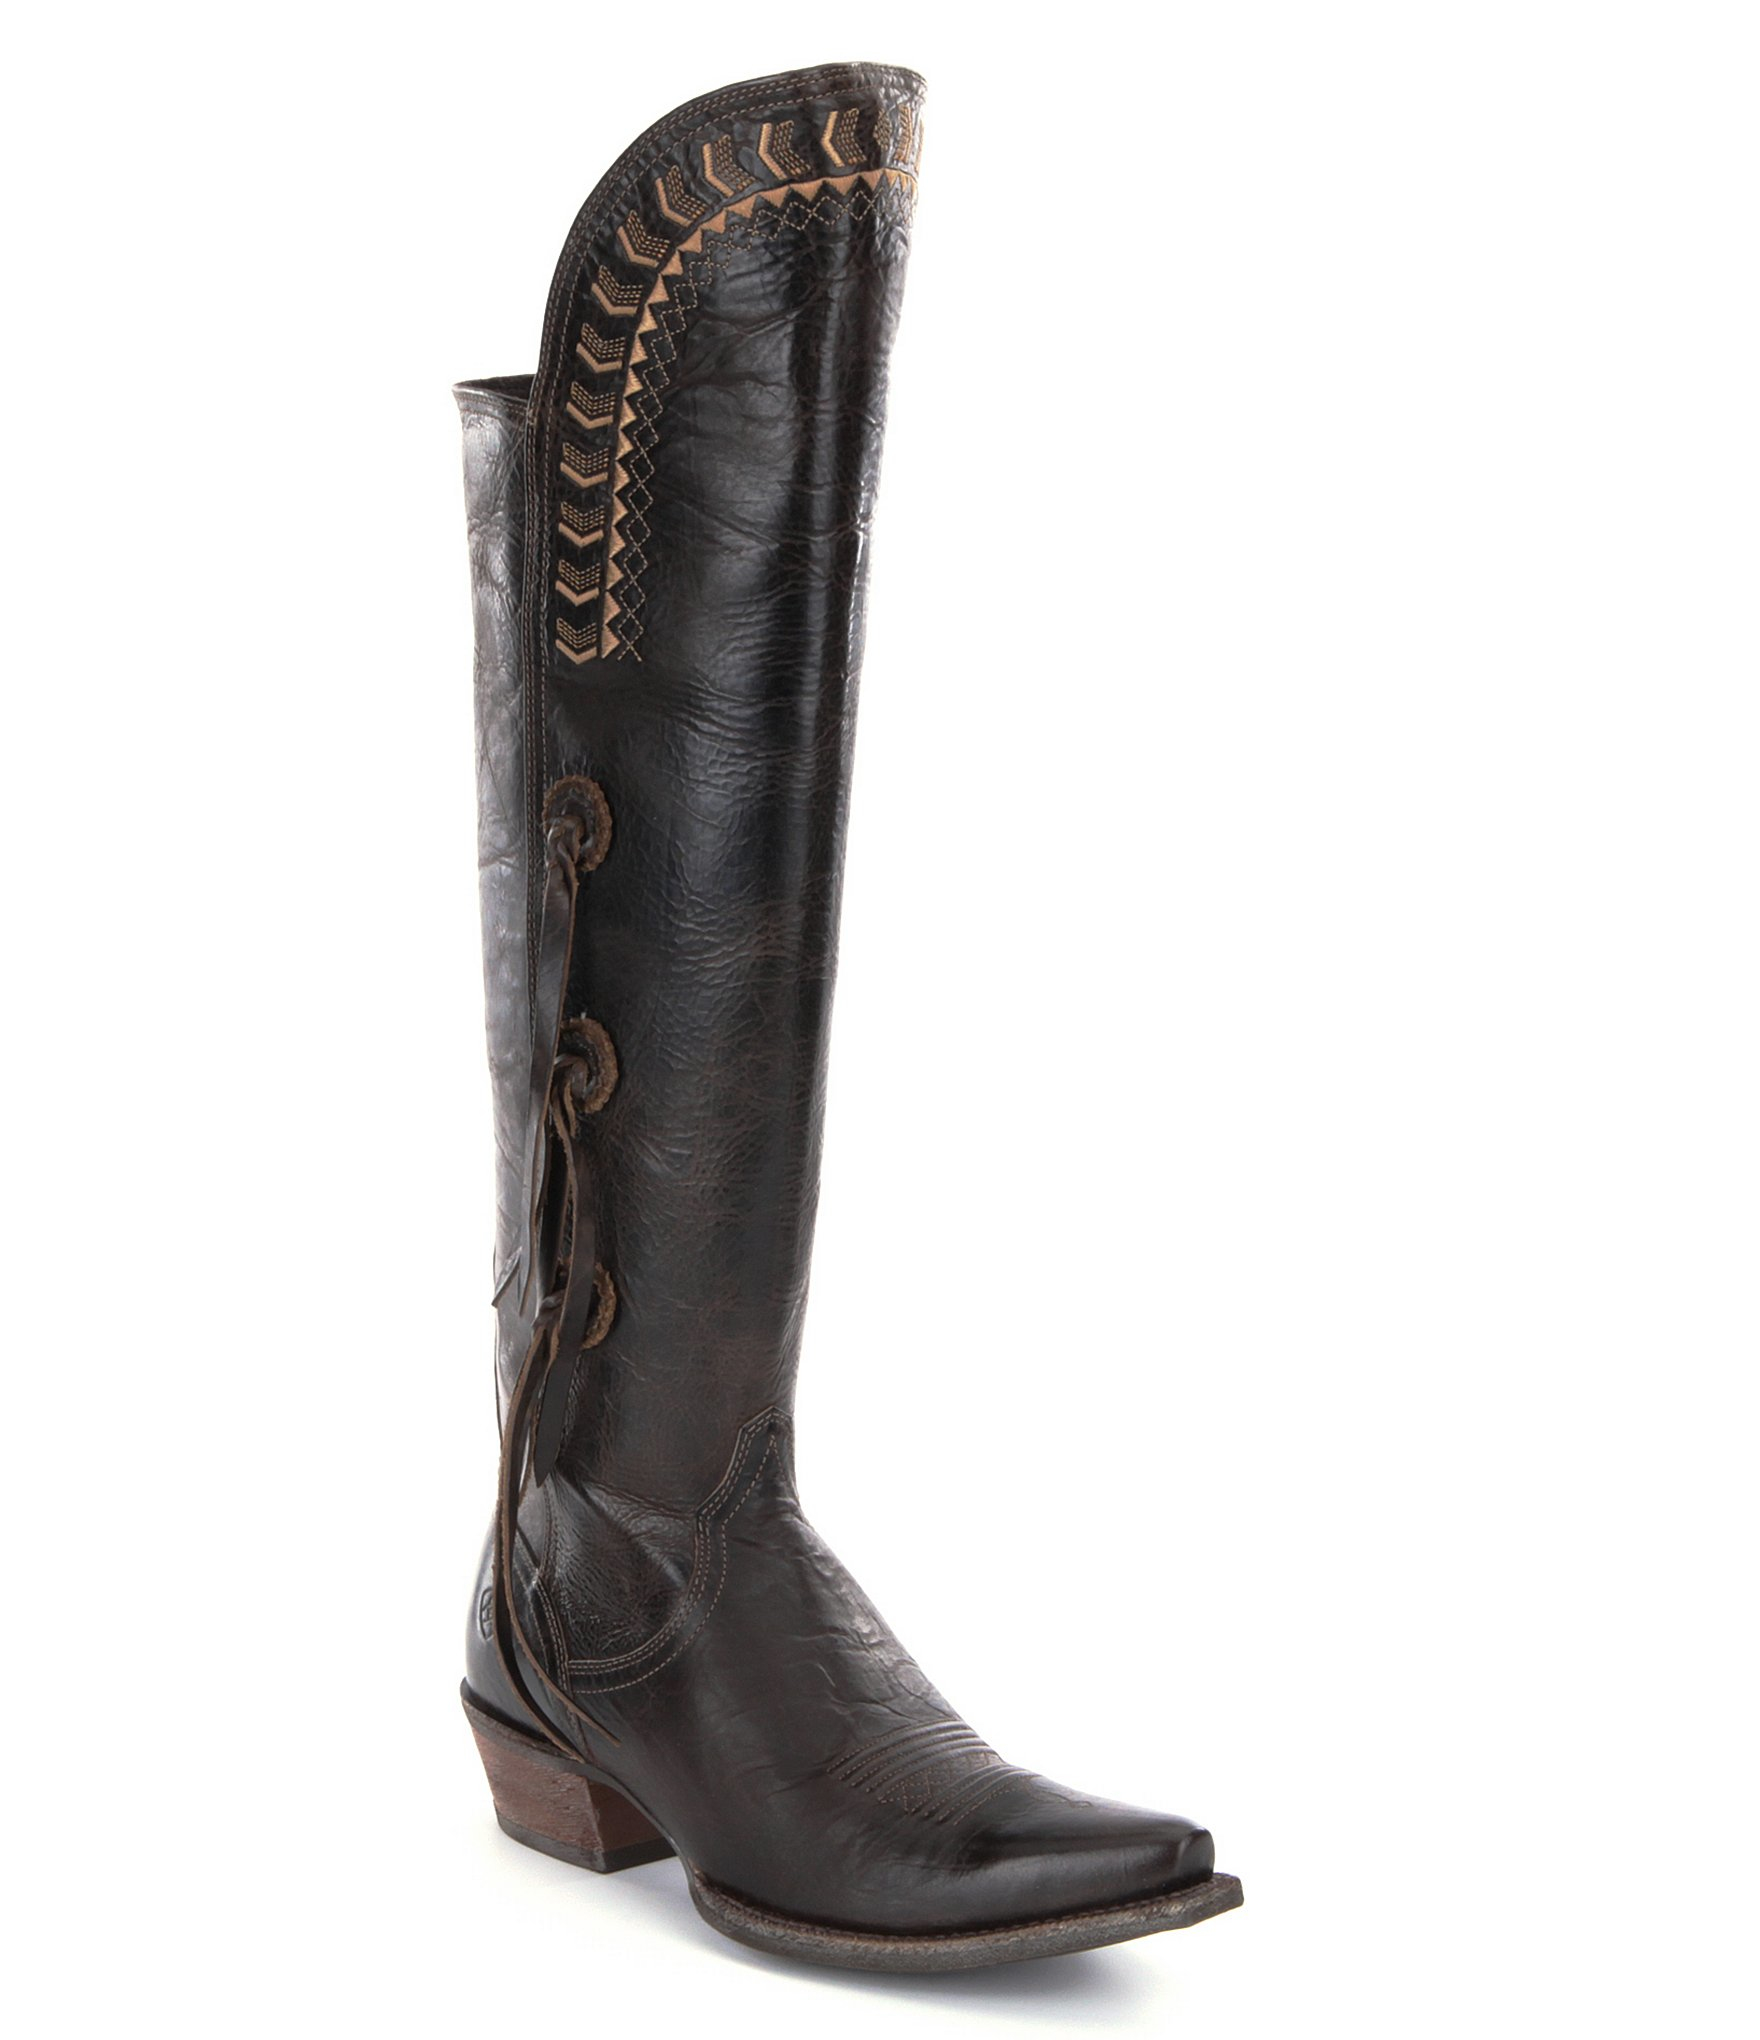 Lyst - Ariat Tallulah Over The Knee Boots in Black